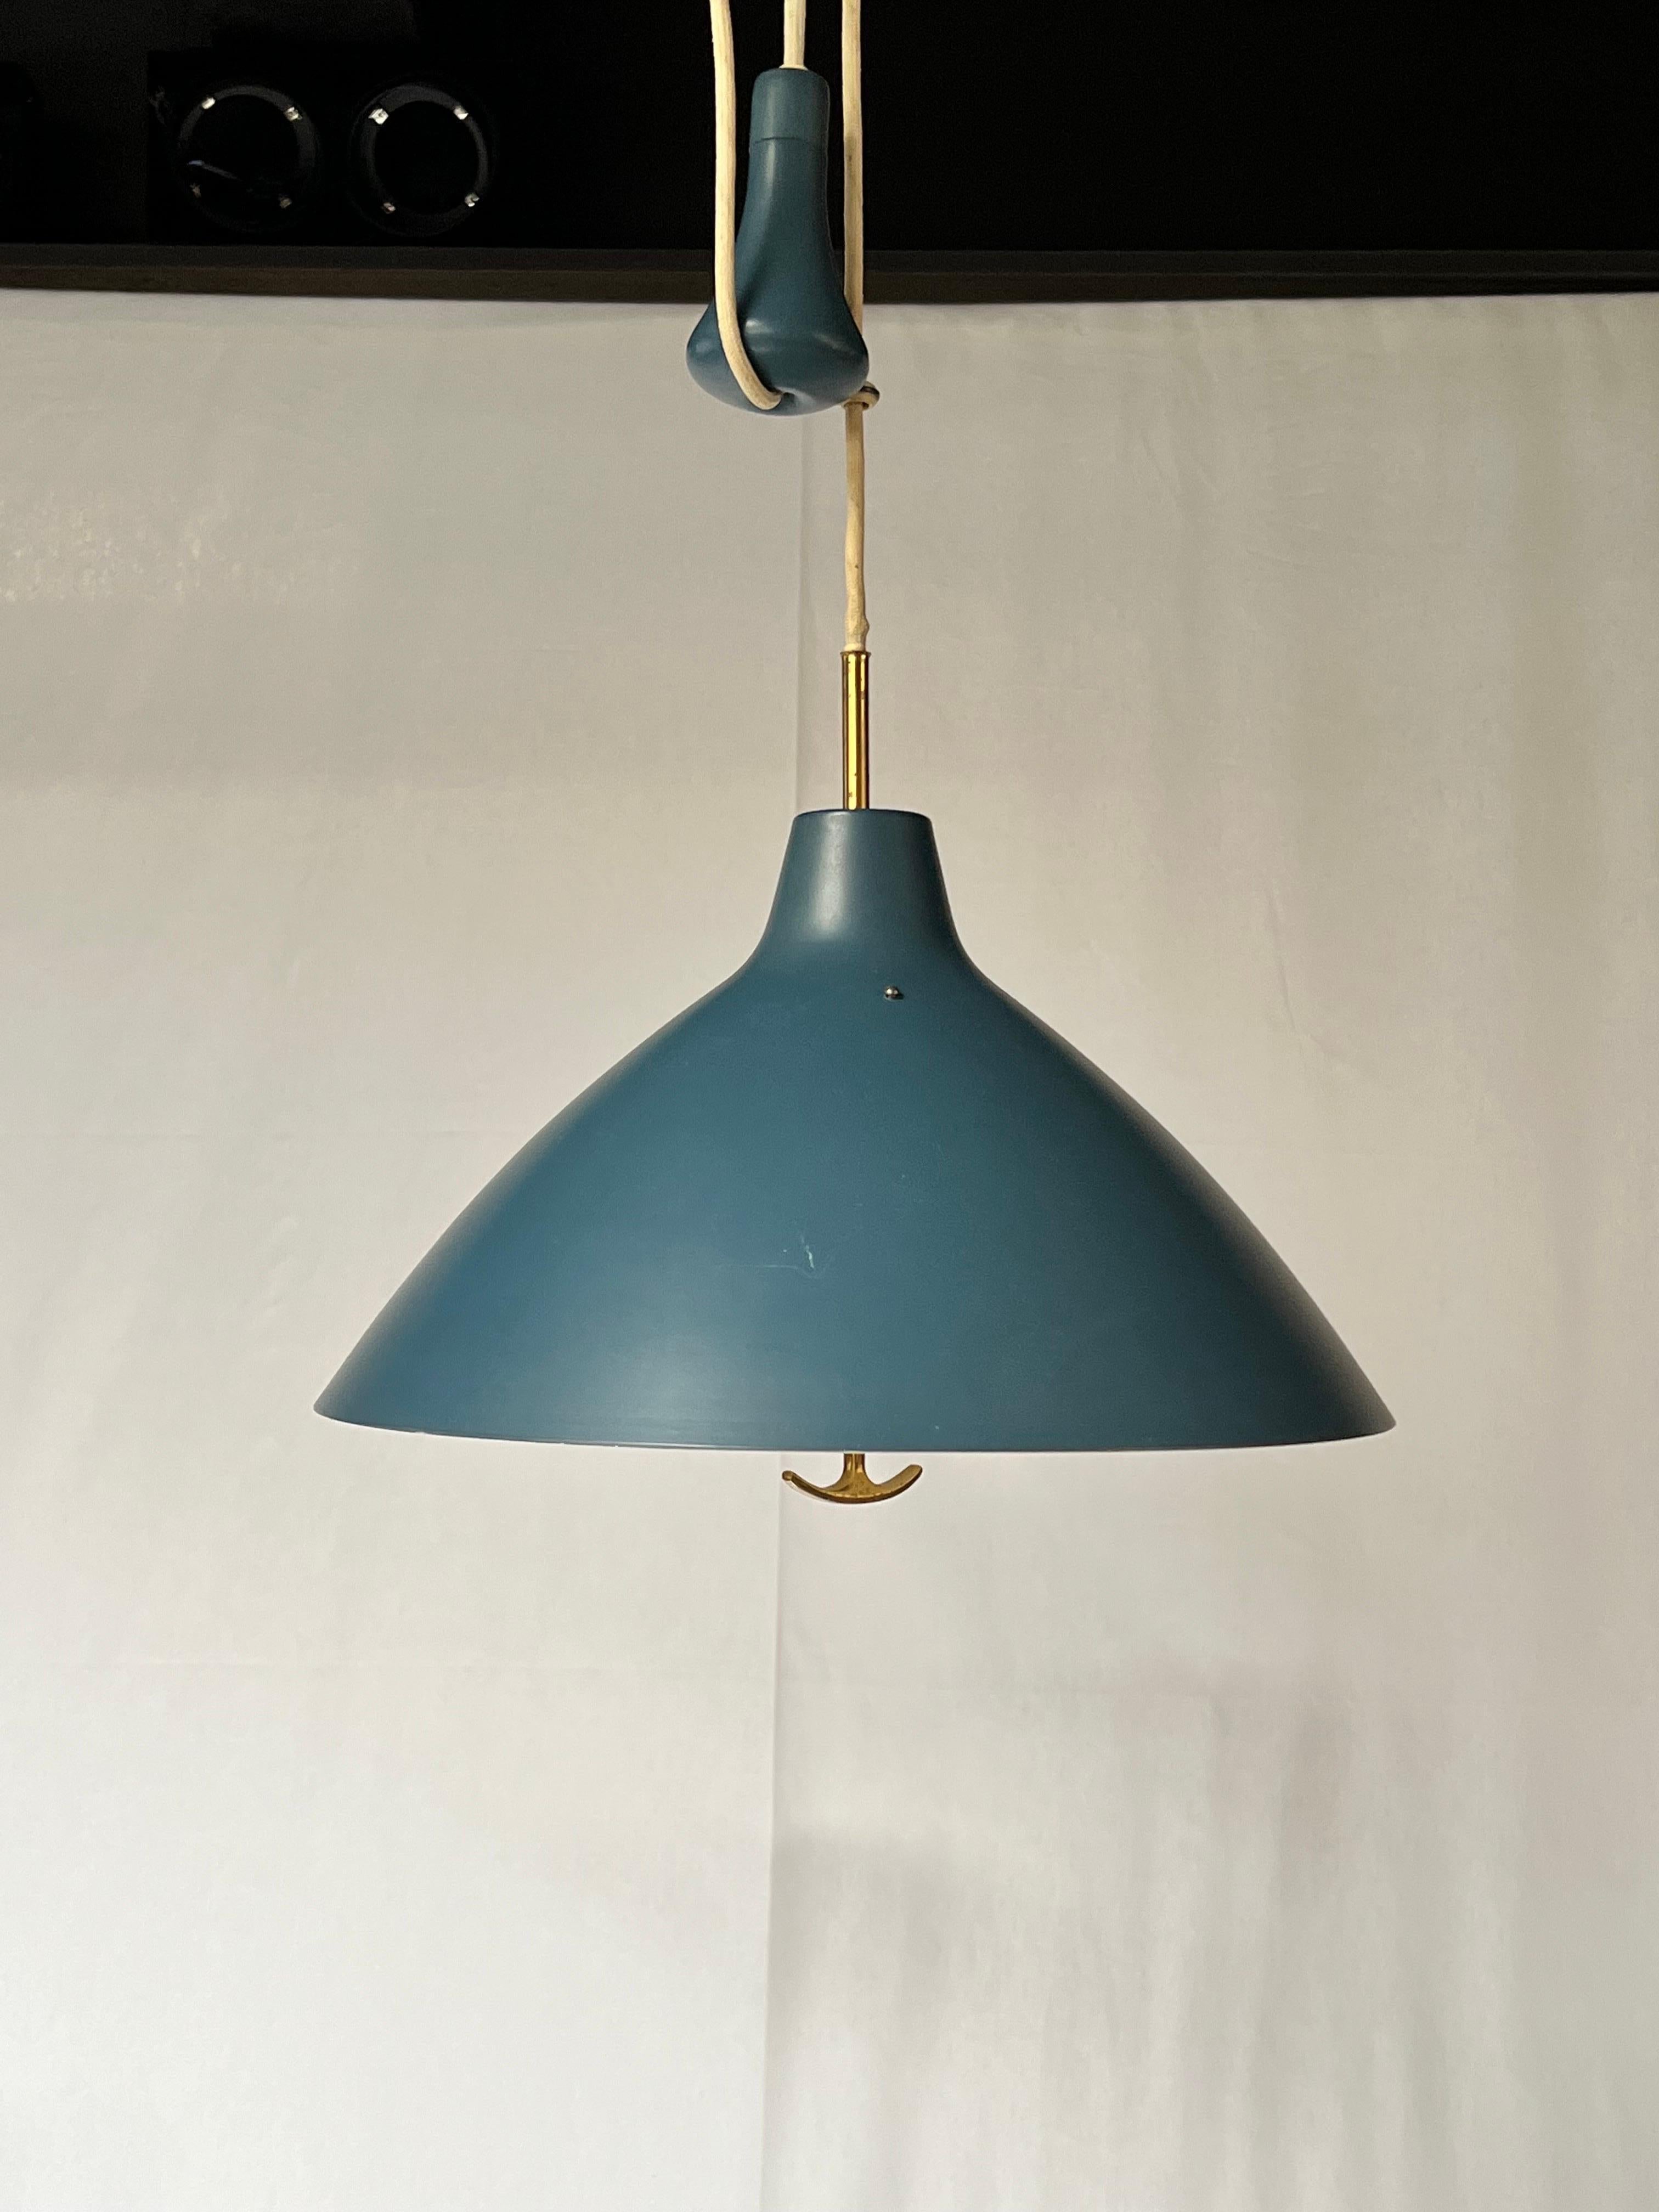 This is a typical blue Swedish used in the 1950's. Lamp made by Bertil Brisborg for ASEA. There is a counterweight to adjust the height. It's a very convenient lamp and well made. A brass handle is to be used to adjust the height. An acrylic dome